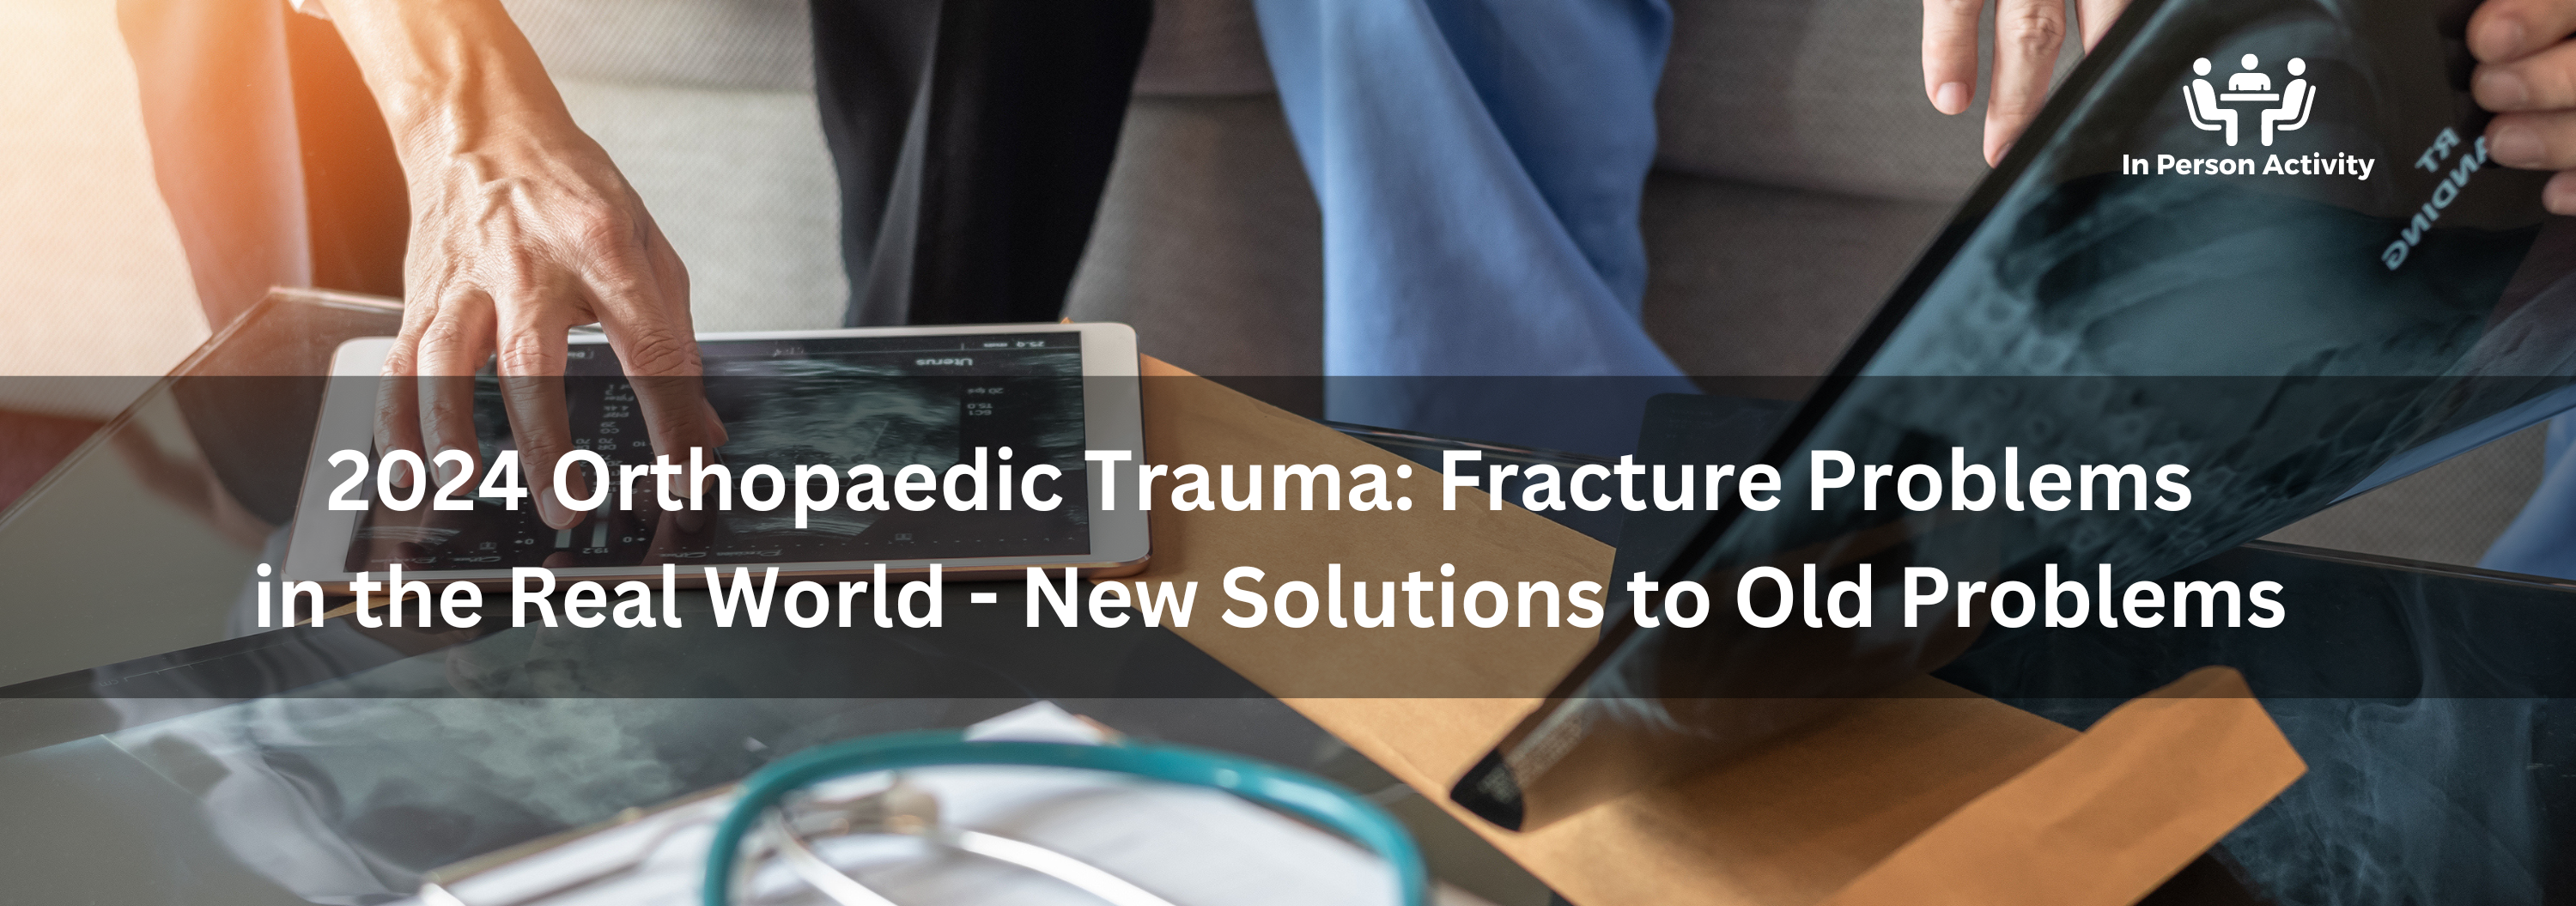 2024 Orthopaedic Trauma: Fracture Problems in the Real World - New Solutions to Old Problems Banner